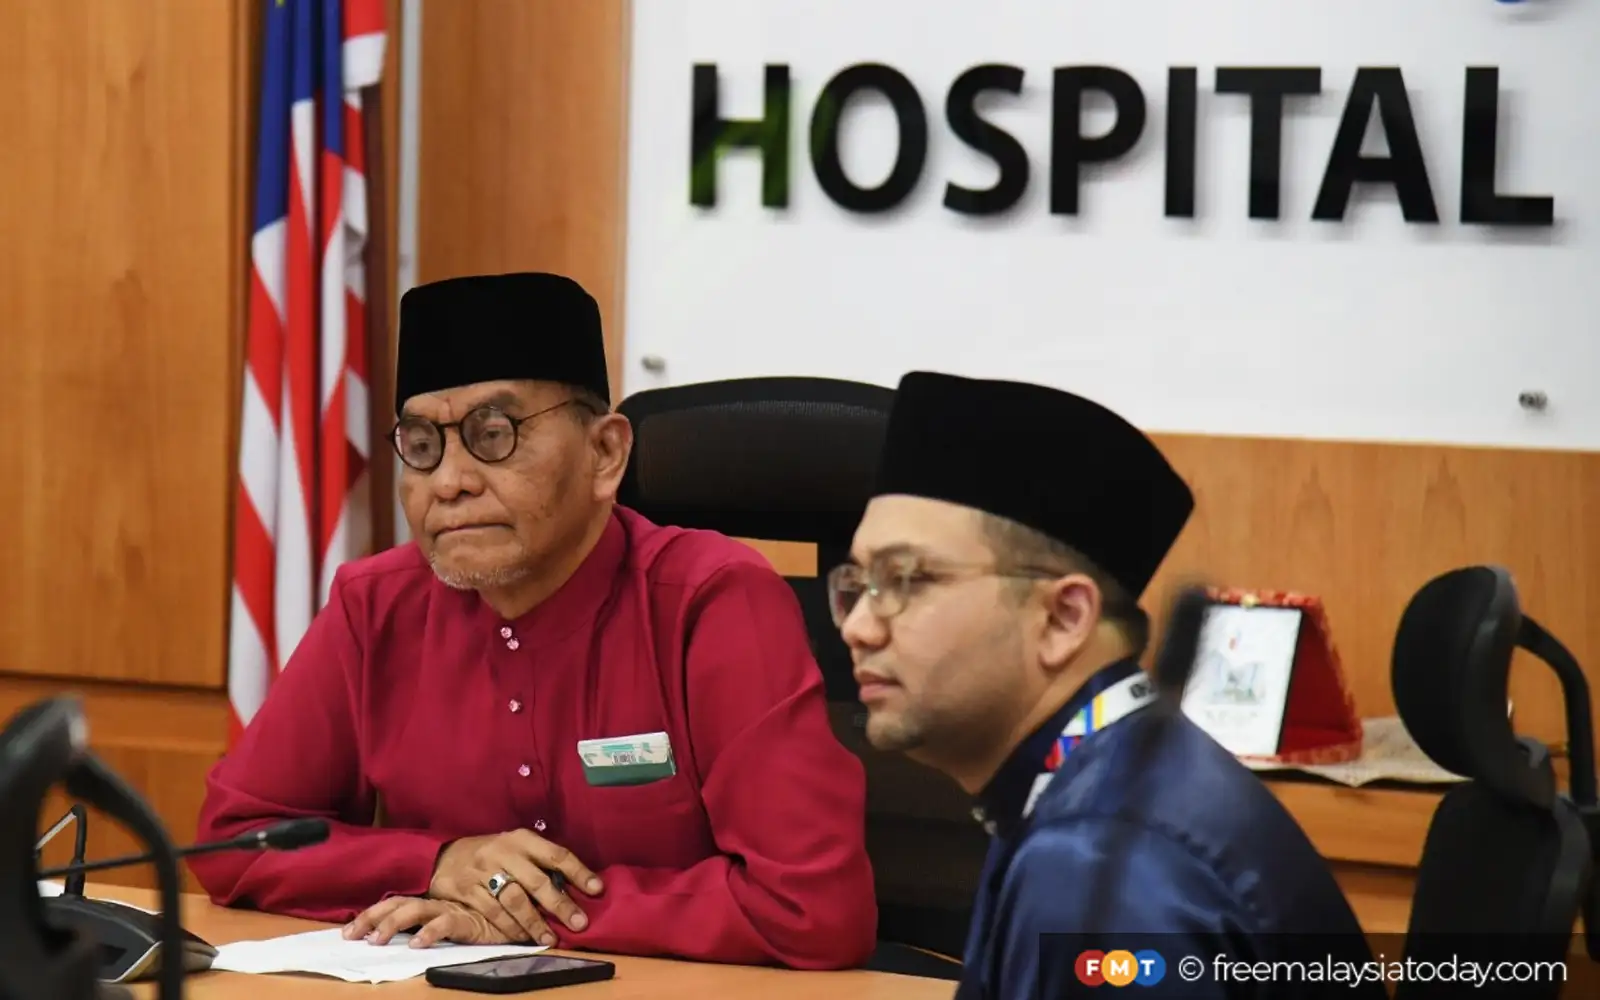 changes to medical act to include recognition of all specialists, says dzul